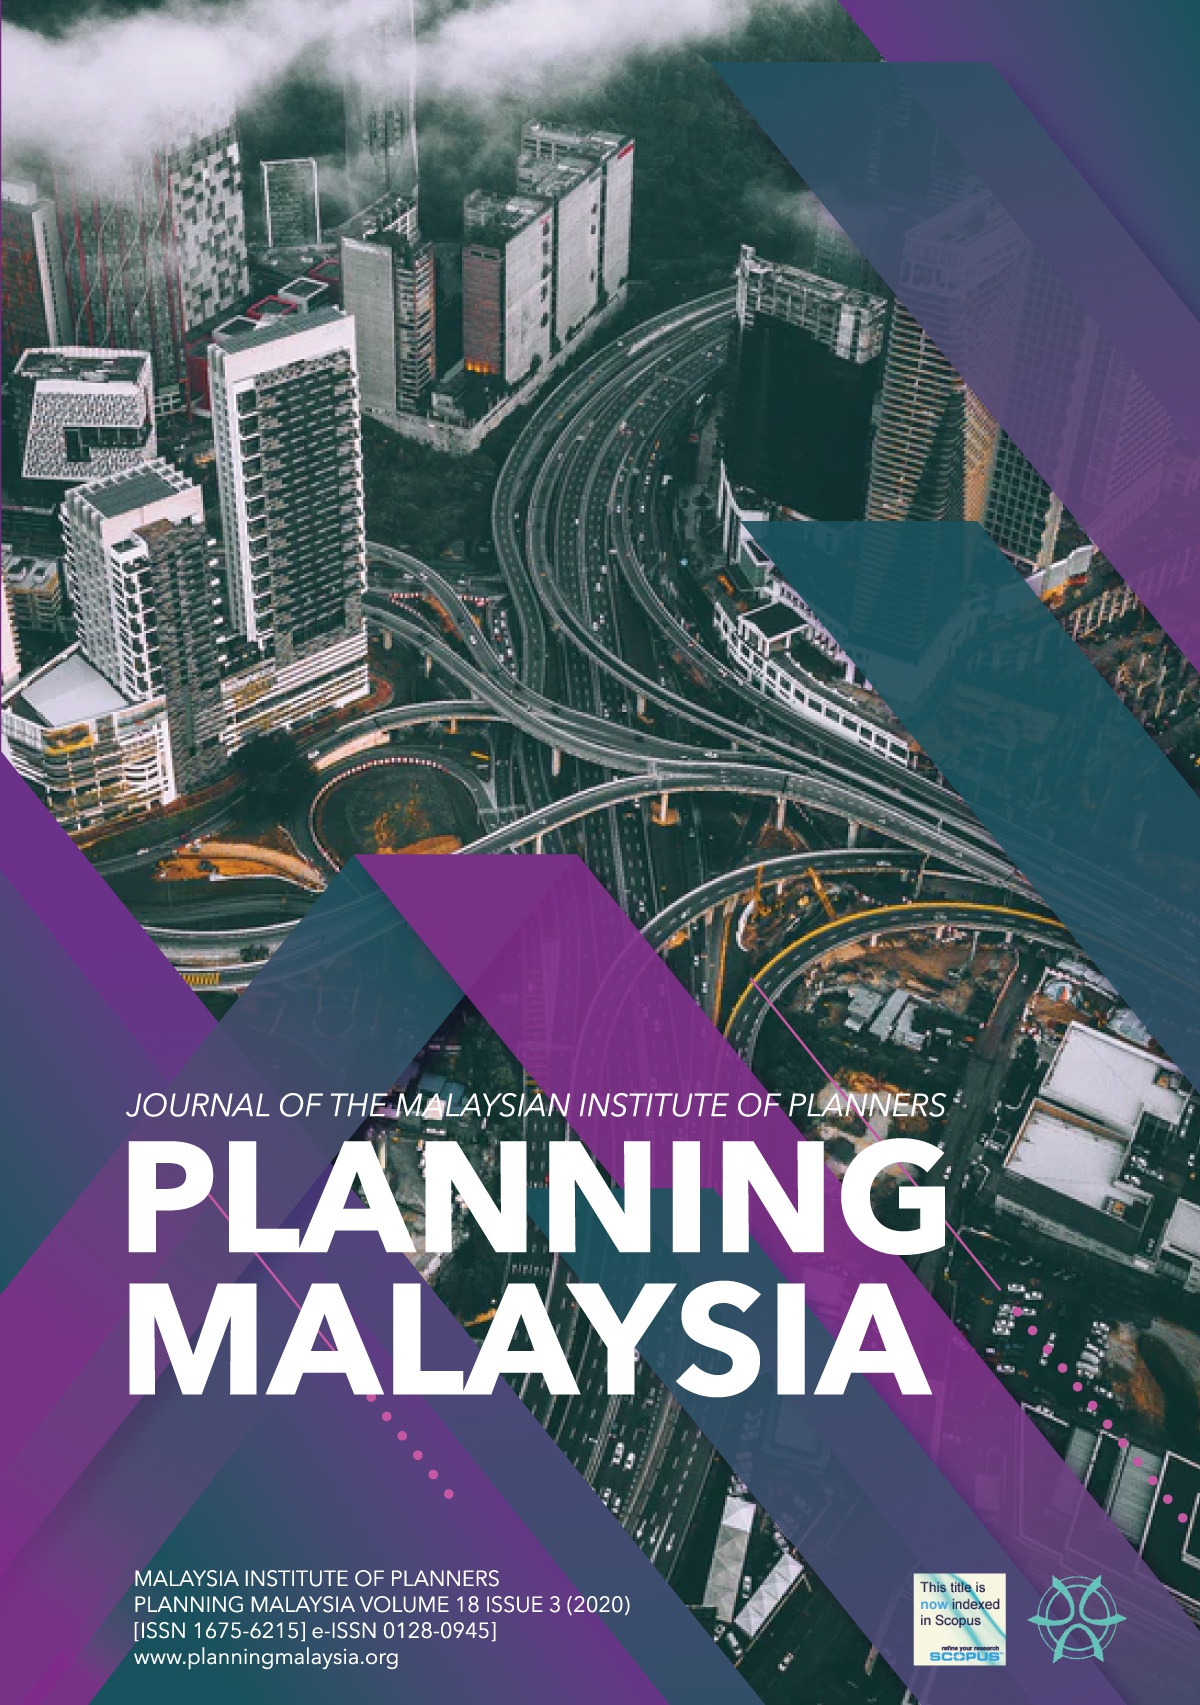 					View Vol. 18 (2020): PLANNING MALAYSIA JOURNAL : Volume 18, Issue 3, 2020
				